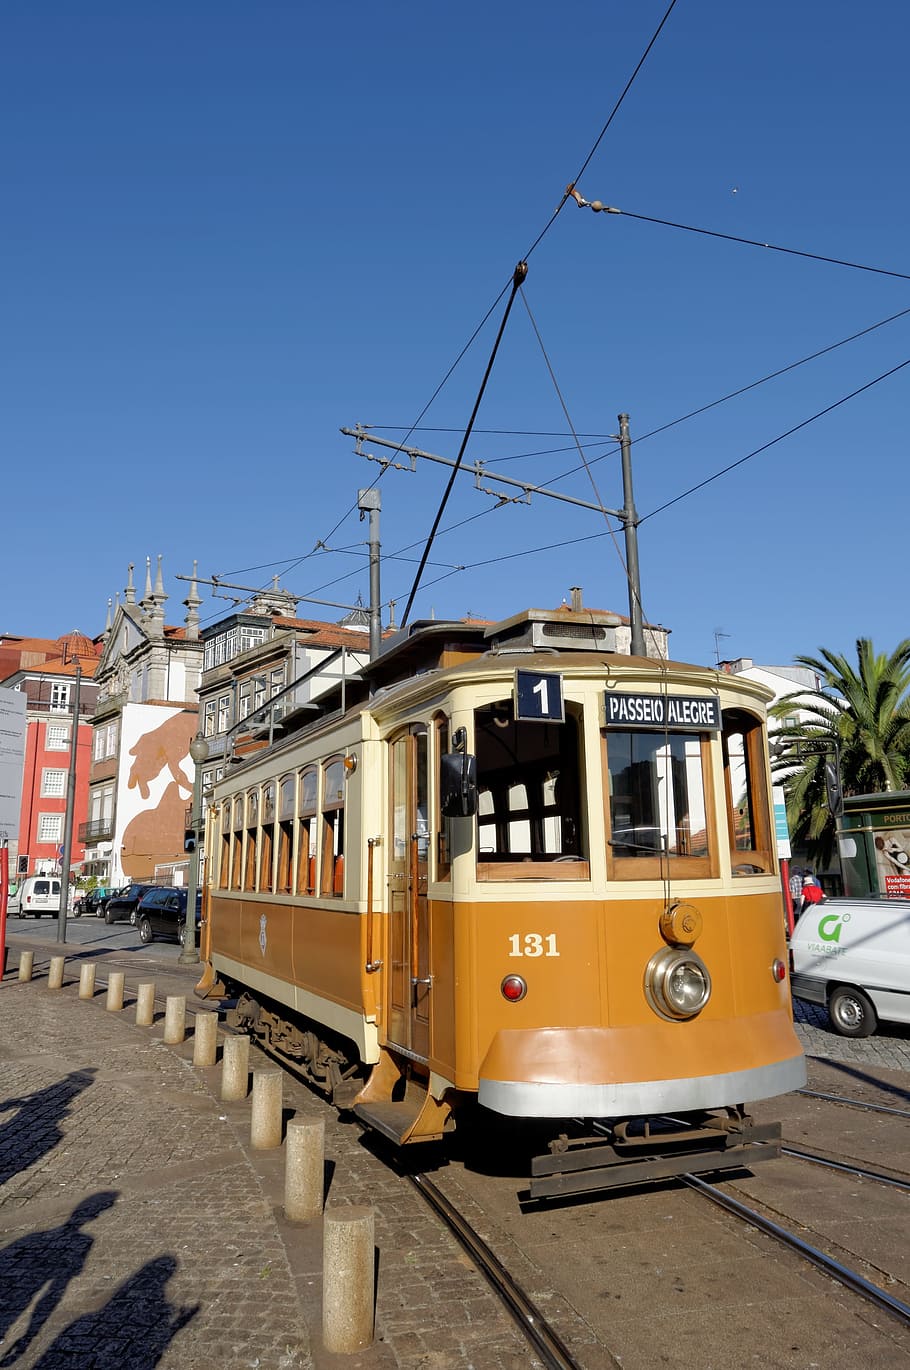 porto, douro, portugal, old town, historically, river, holiday, travel, historic old town, tram